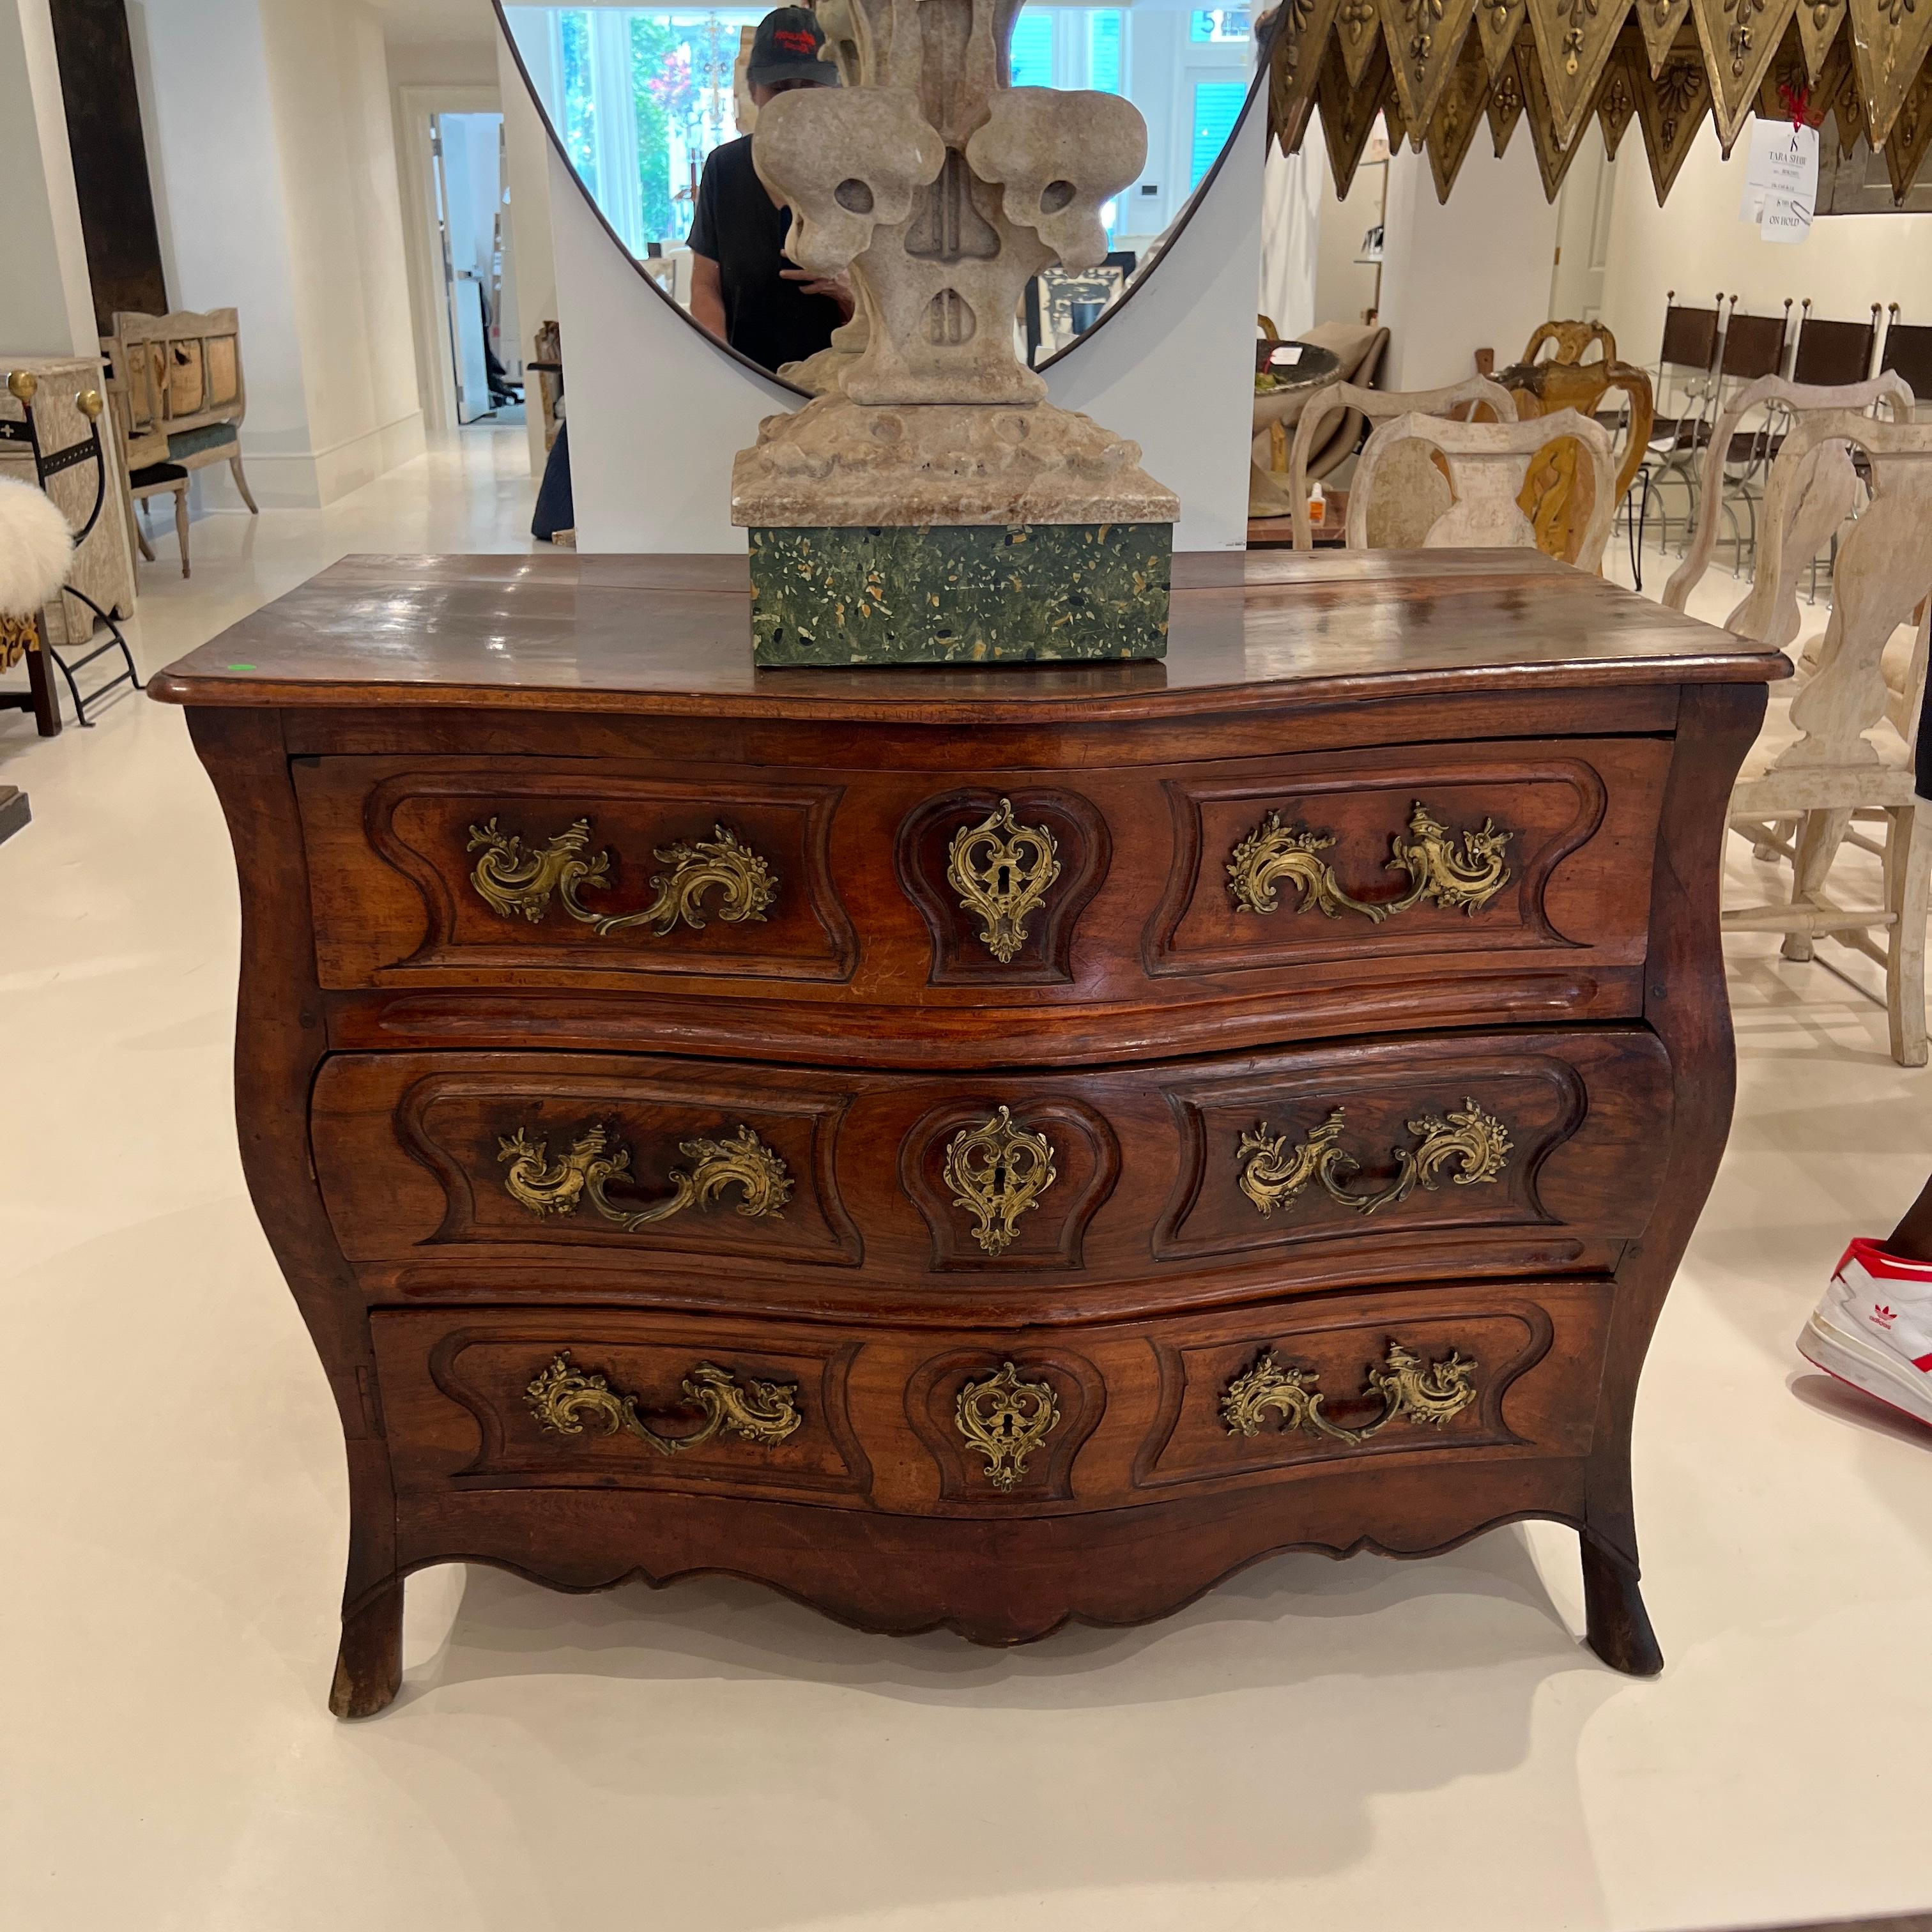 
This lovely piece is the quintessential example of a well crafted French commode. The proportions are pleasing, the details are superb with carving on side panels and the front apron. The pulls and key hole escutcheons are oversized and impressive.